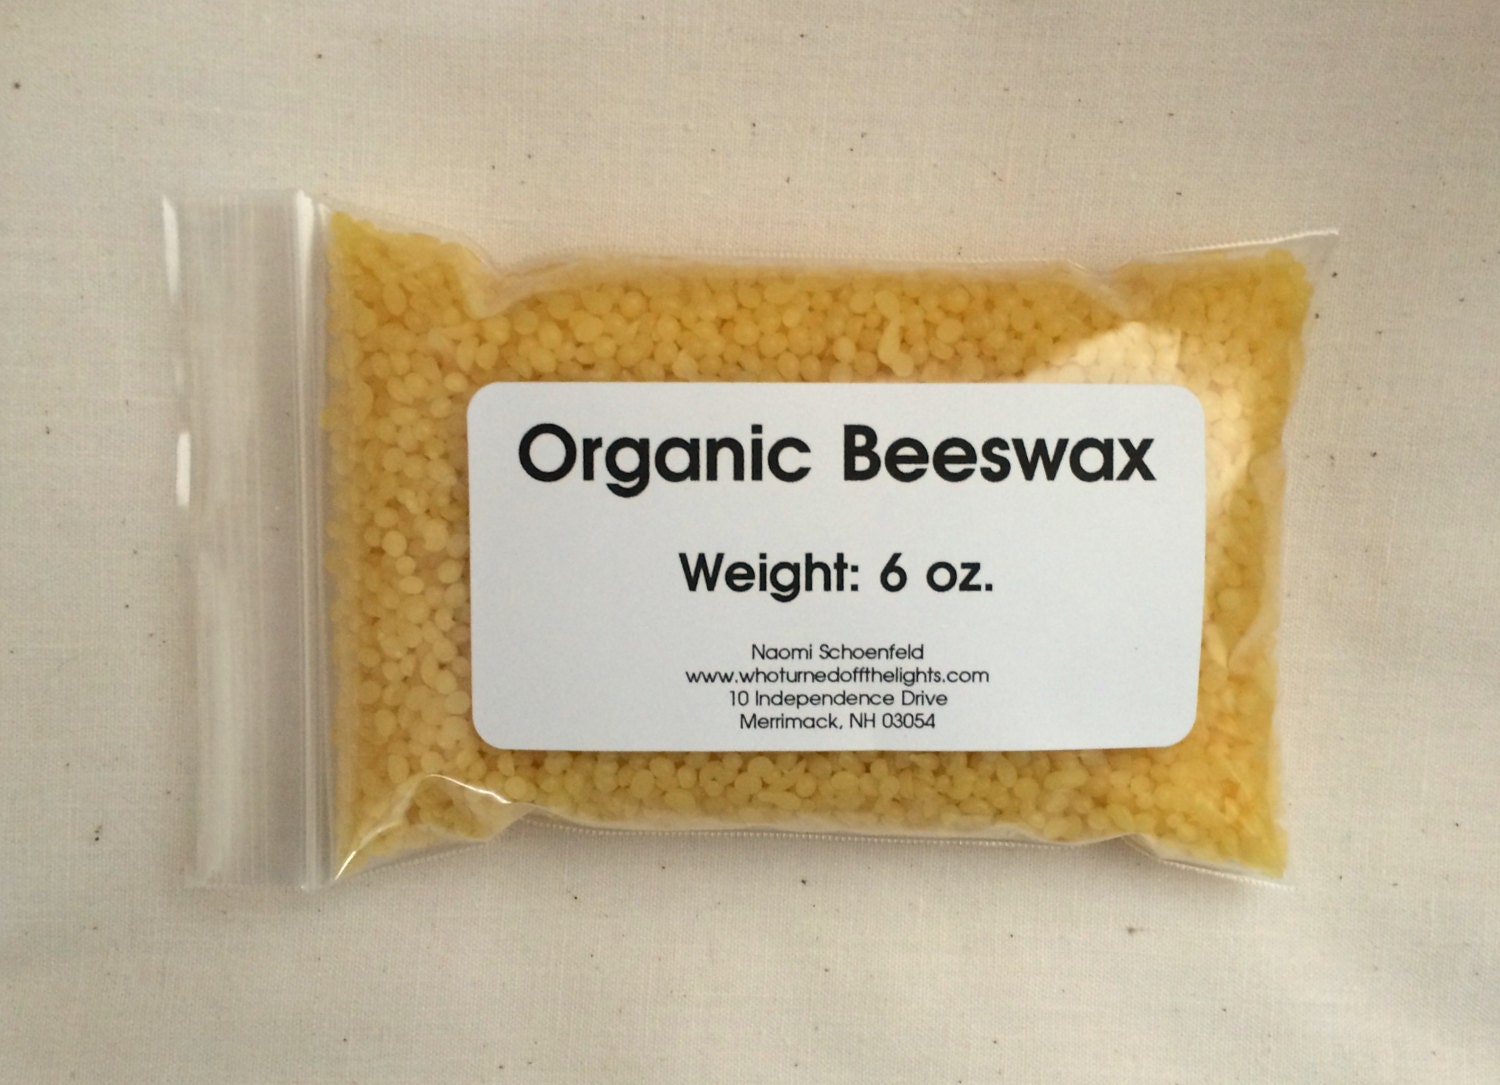 Soapeauty Yellow Beewax Natural Bees Wax Pastilles For Lip Balm, Skin Care  Beeswax Pellets Used as Candle Making Supplies for Beeswax Candles (4 OZ)